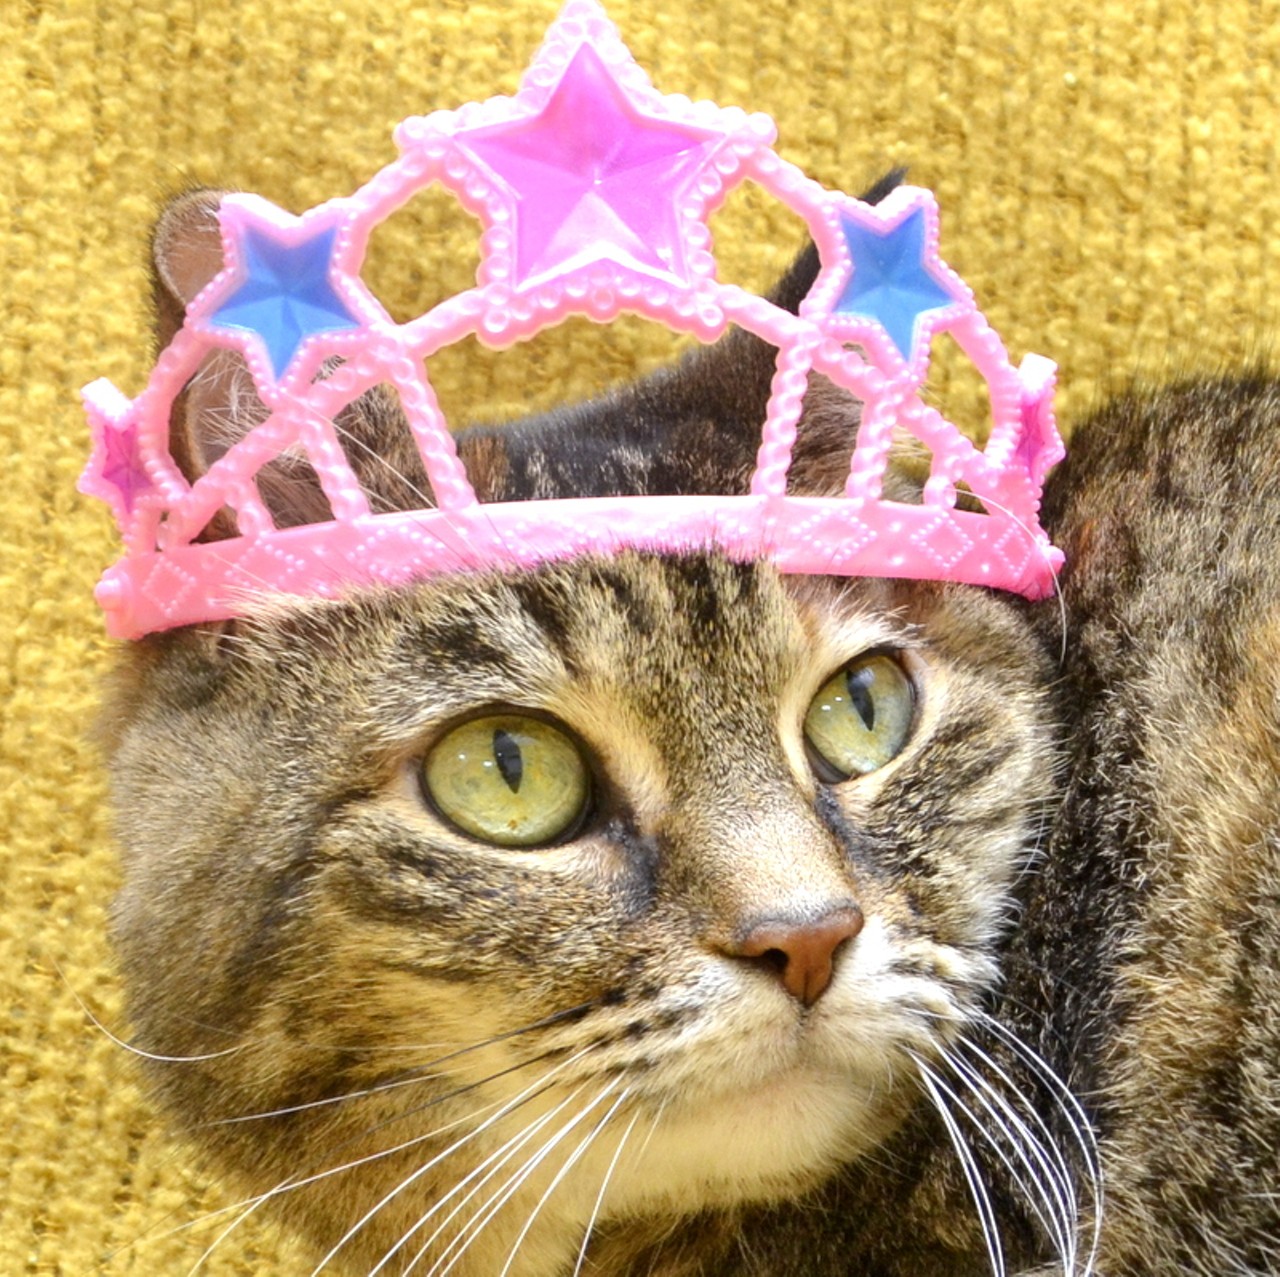 NAME:  Princess 
GENDER: Female
BREED: Domestic Short Hair
AGE: 10 years, 1 month
WEIGHT: 10 pounds
SPECIAL CONSIDERATIONS: None
REASON I CAME TO MHS: Owner surrender
LOCATION: Berman Center for Animal Care in Westland
ID NUMBER: 867102